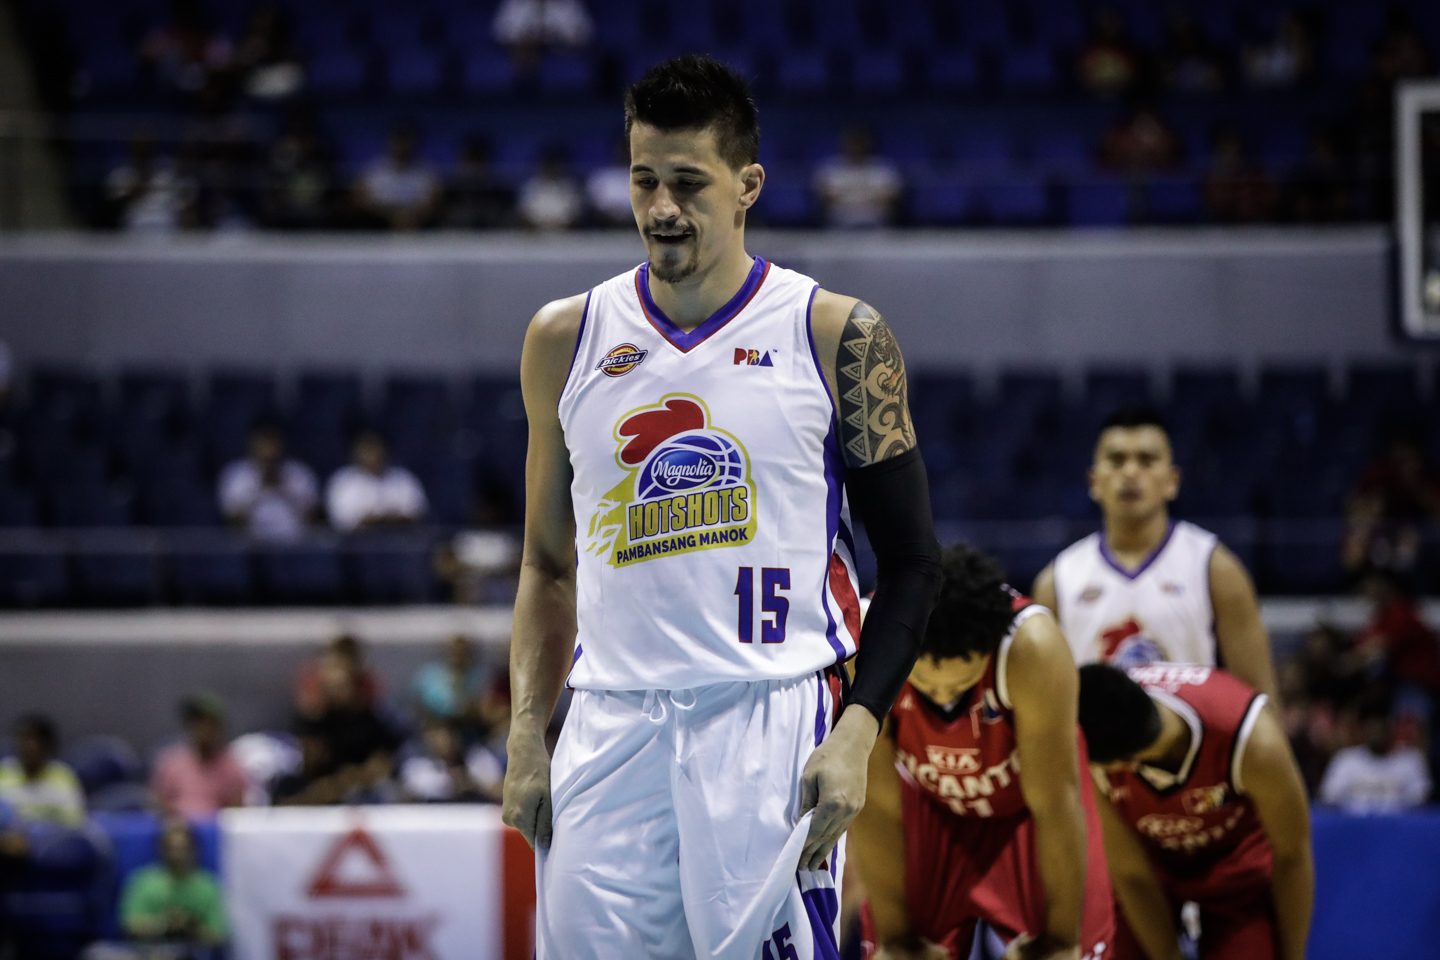 WATCH: Pingris gets busted lip but comes back immediately to help Magnolia demolish Kia